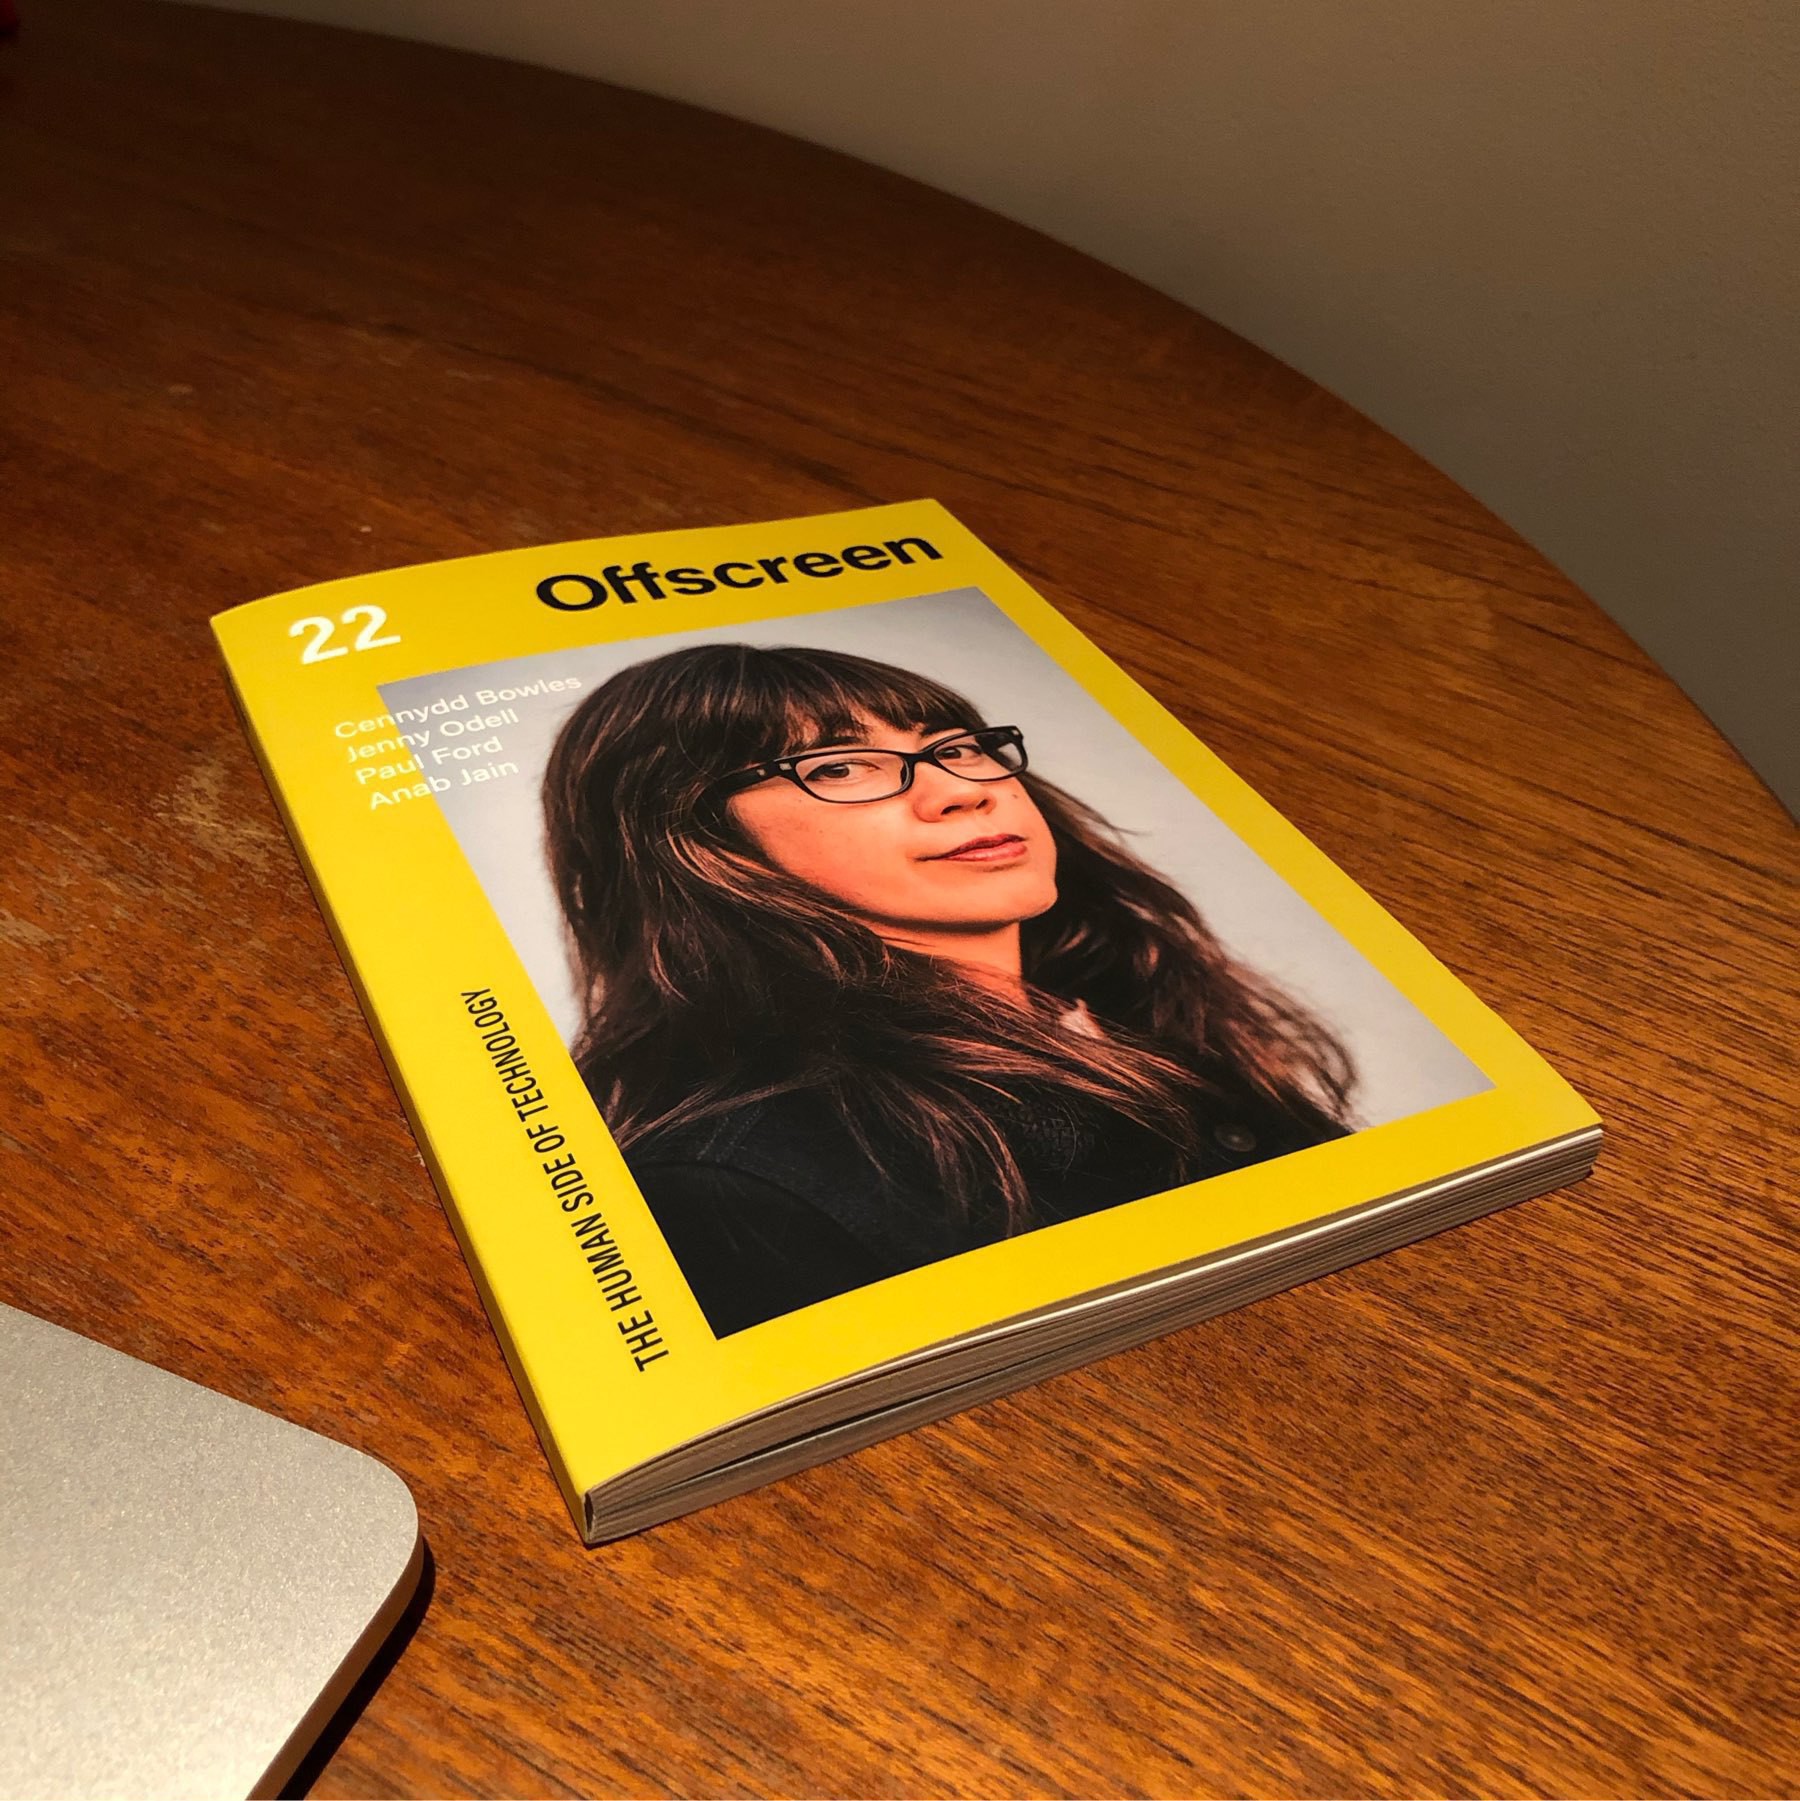 Offscreen magazine on top of brown table